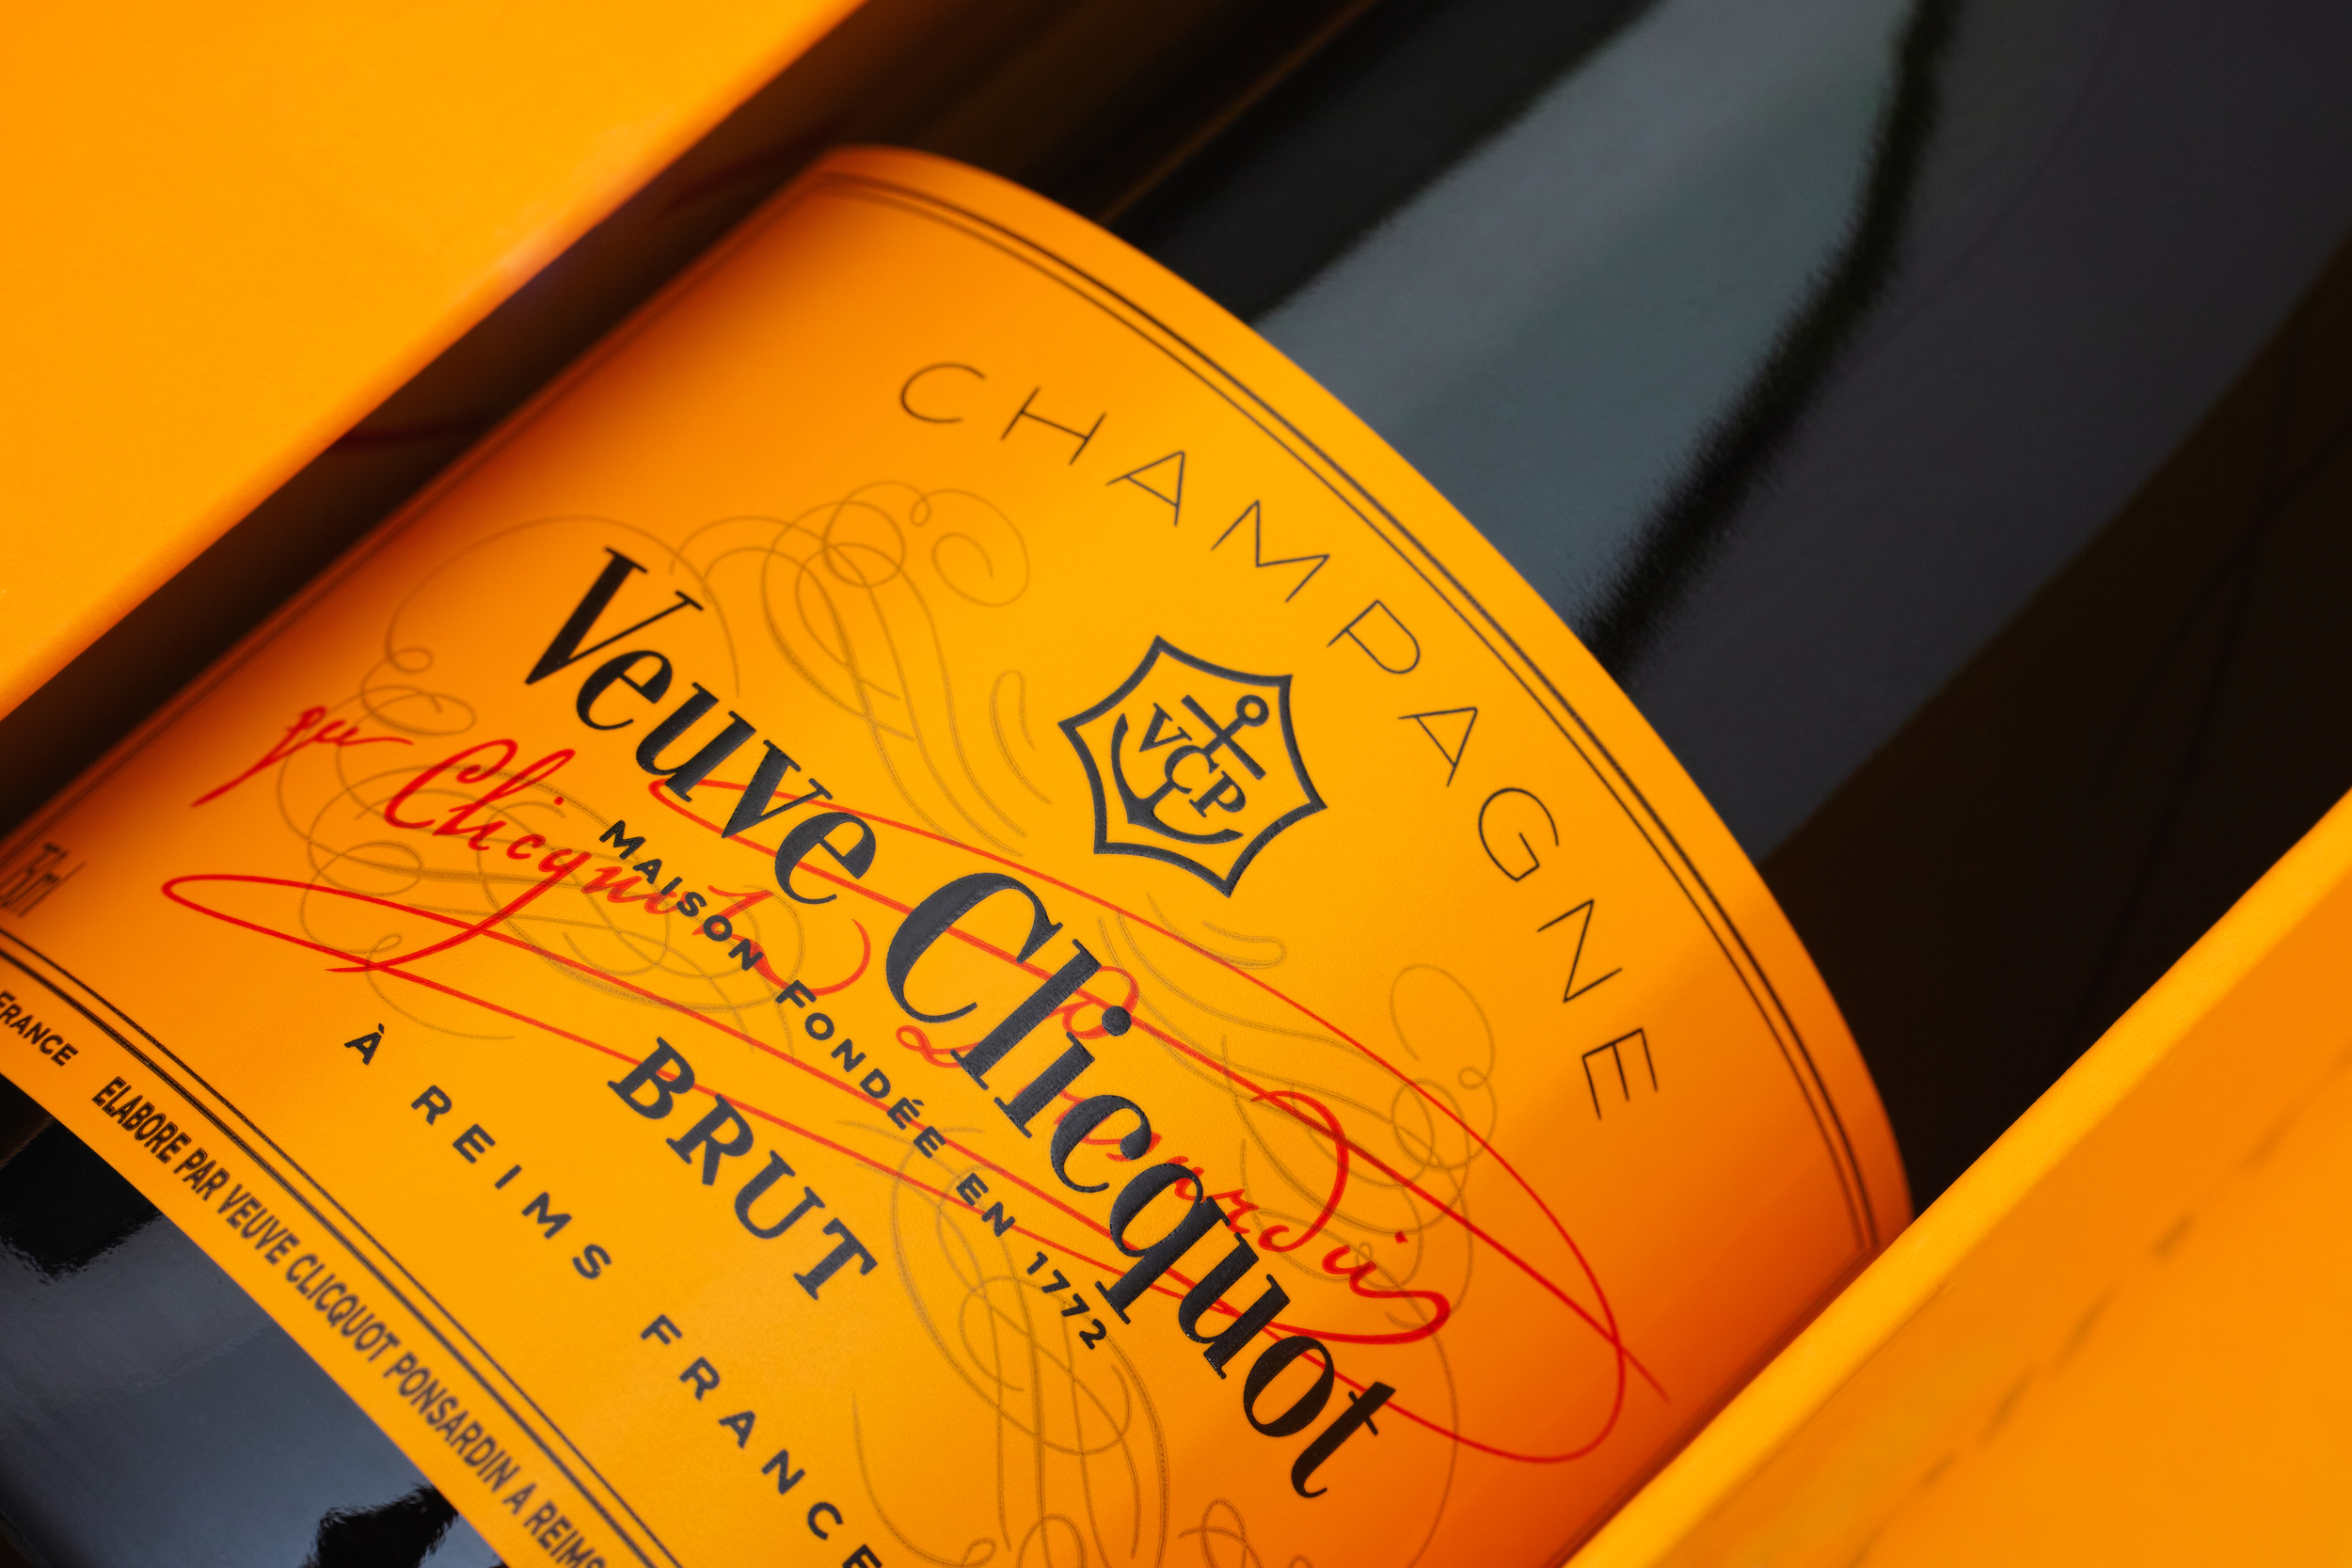 <p>A fun play on the word rendezvous, the Last Rendez-Veuve theme involves everyone's favorite: champagne. If you don't want to use actual Veuve, you can opt for a less expensive brand of champs, but make sure to get pink and orange decorations and at least one balloon bottle. </p><p><a href='https://www.msn.com/en-us/community/channel/vid-cj9pqbr0vn9in2b6ddcd8sfgpfq6x6utp44fssrv6mc2gtybw0us'>Follow us on MSN to see more of our exclusive lifestyle content.</a></p>